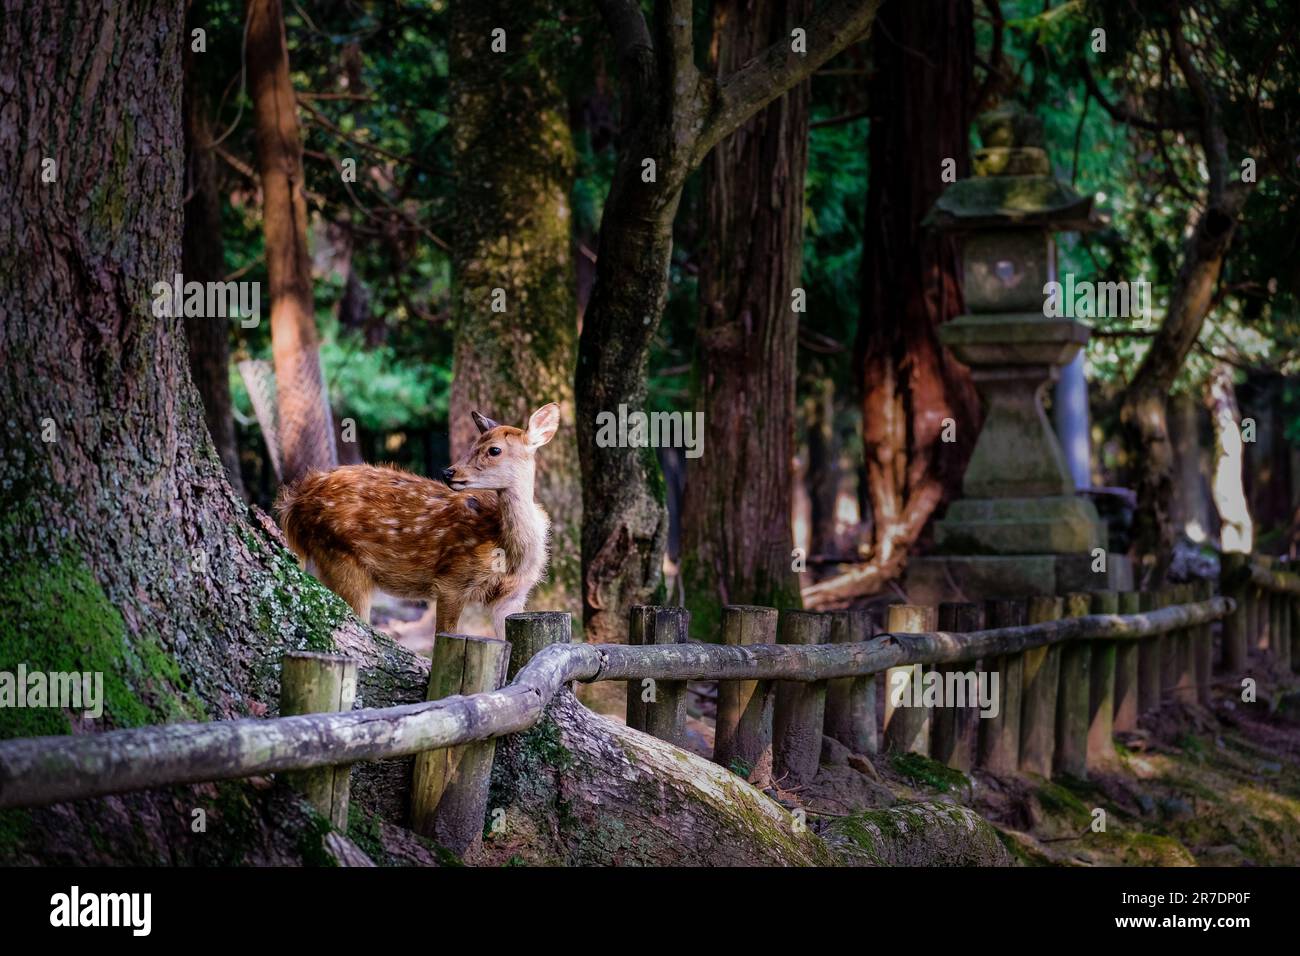 A single sacred deer walking through Nara park, Japan, amongst the trees and ancient temple. Stock Photo